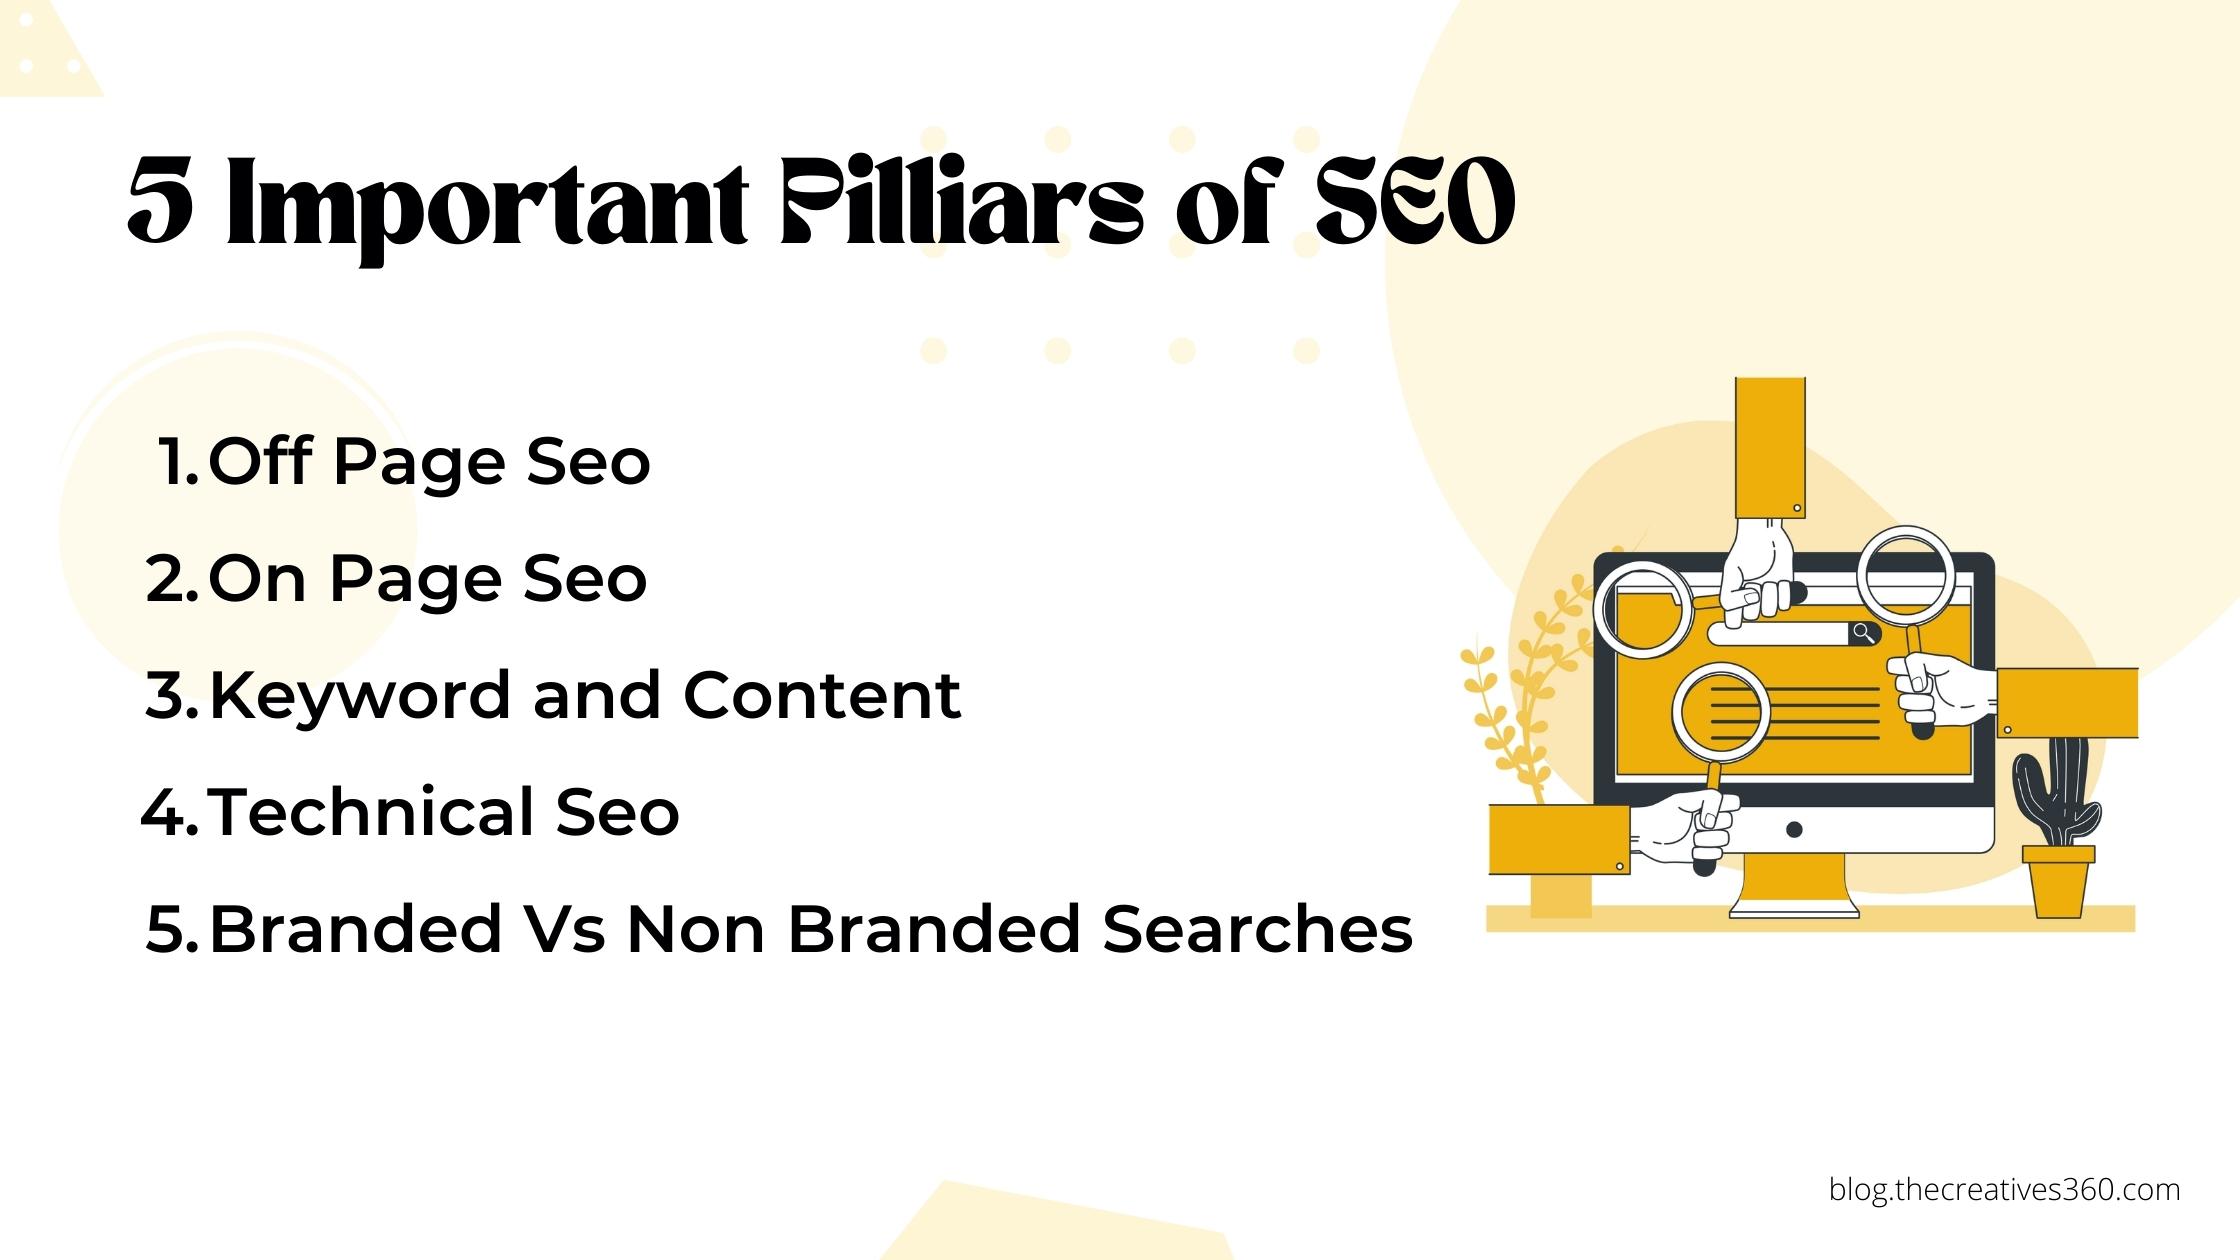 Branding your Business through SEO in 2023